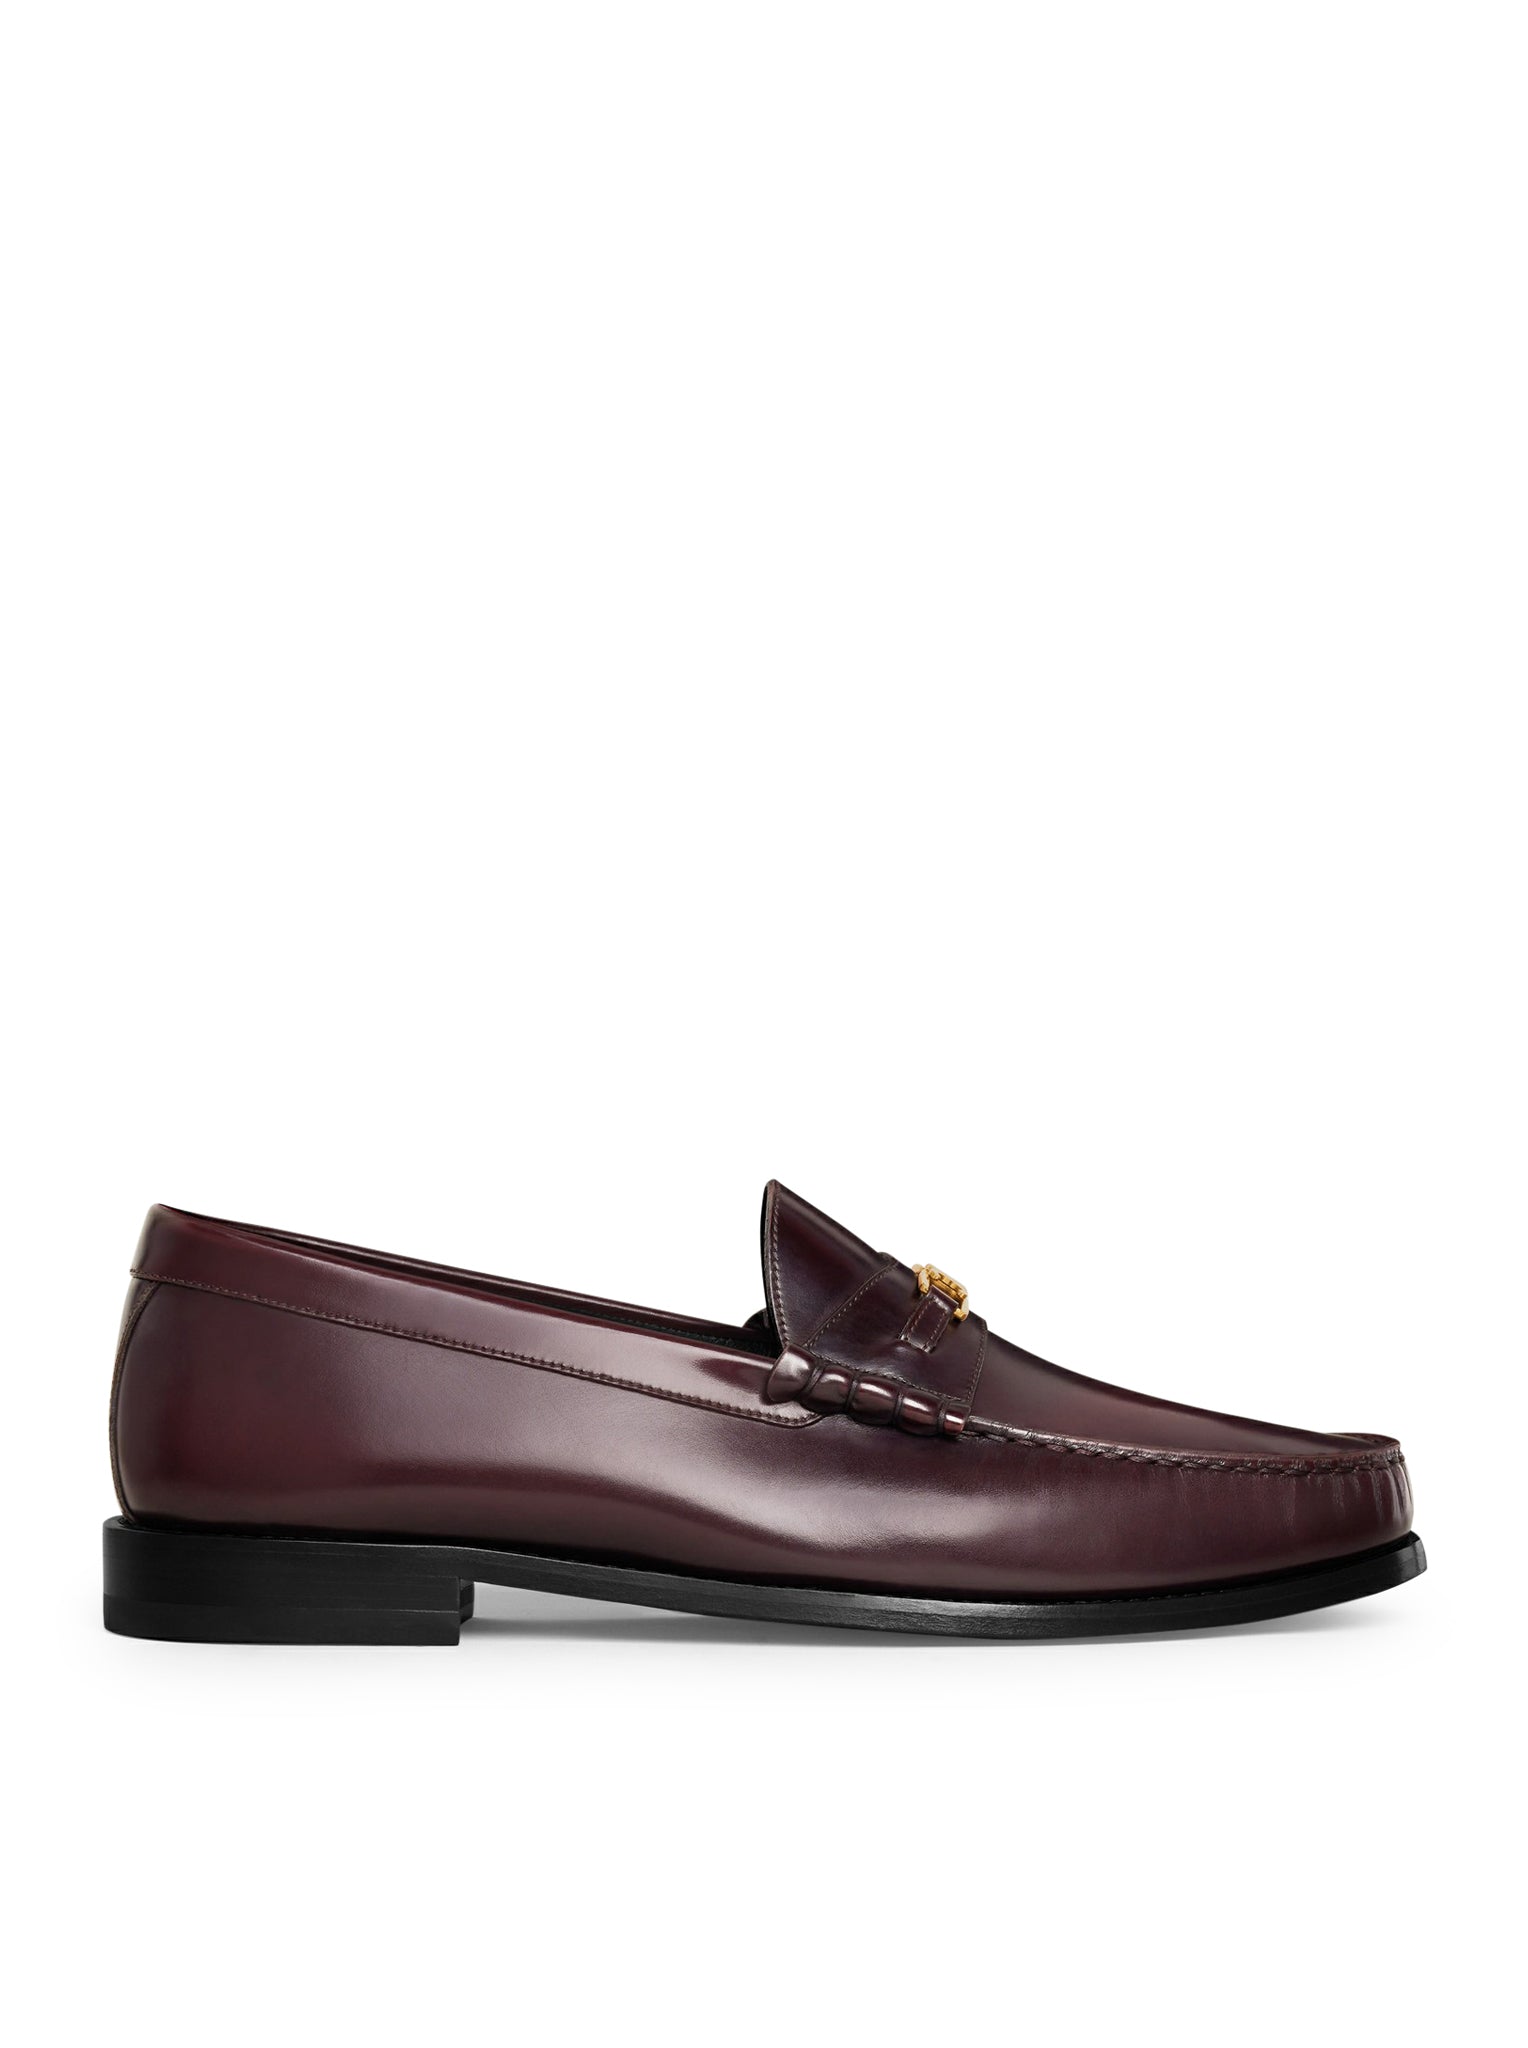 TRIOMPHE LUCO CELINE MOCCASIN IN BORDEAUX POLISHED BULL LEATHER